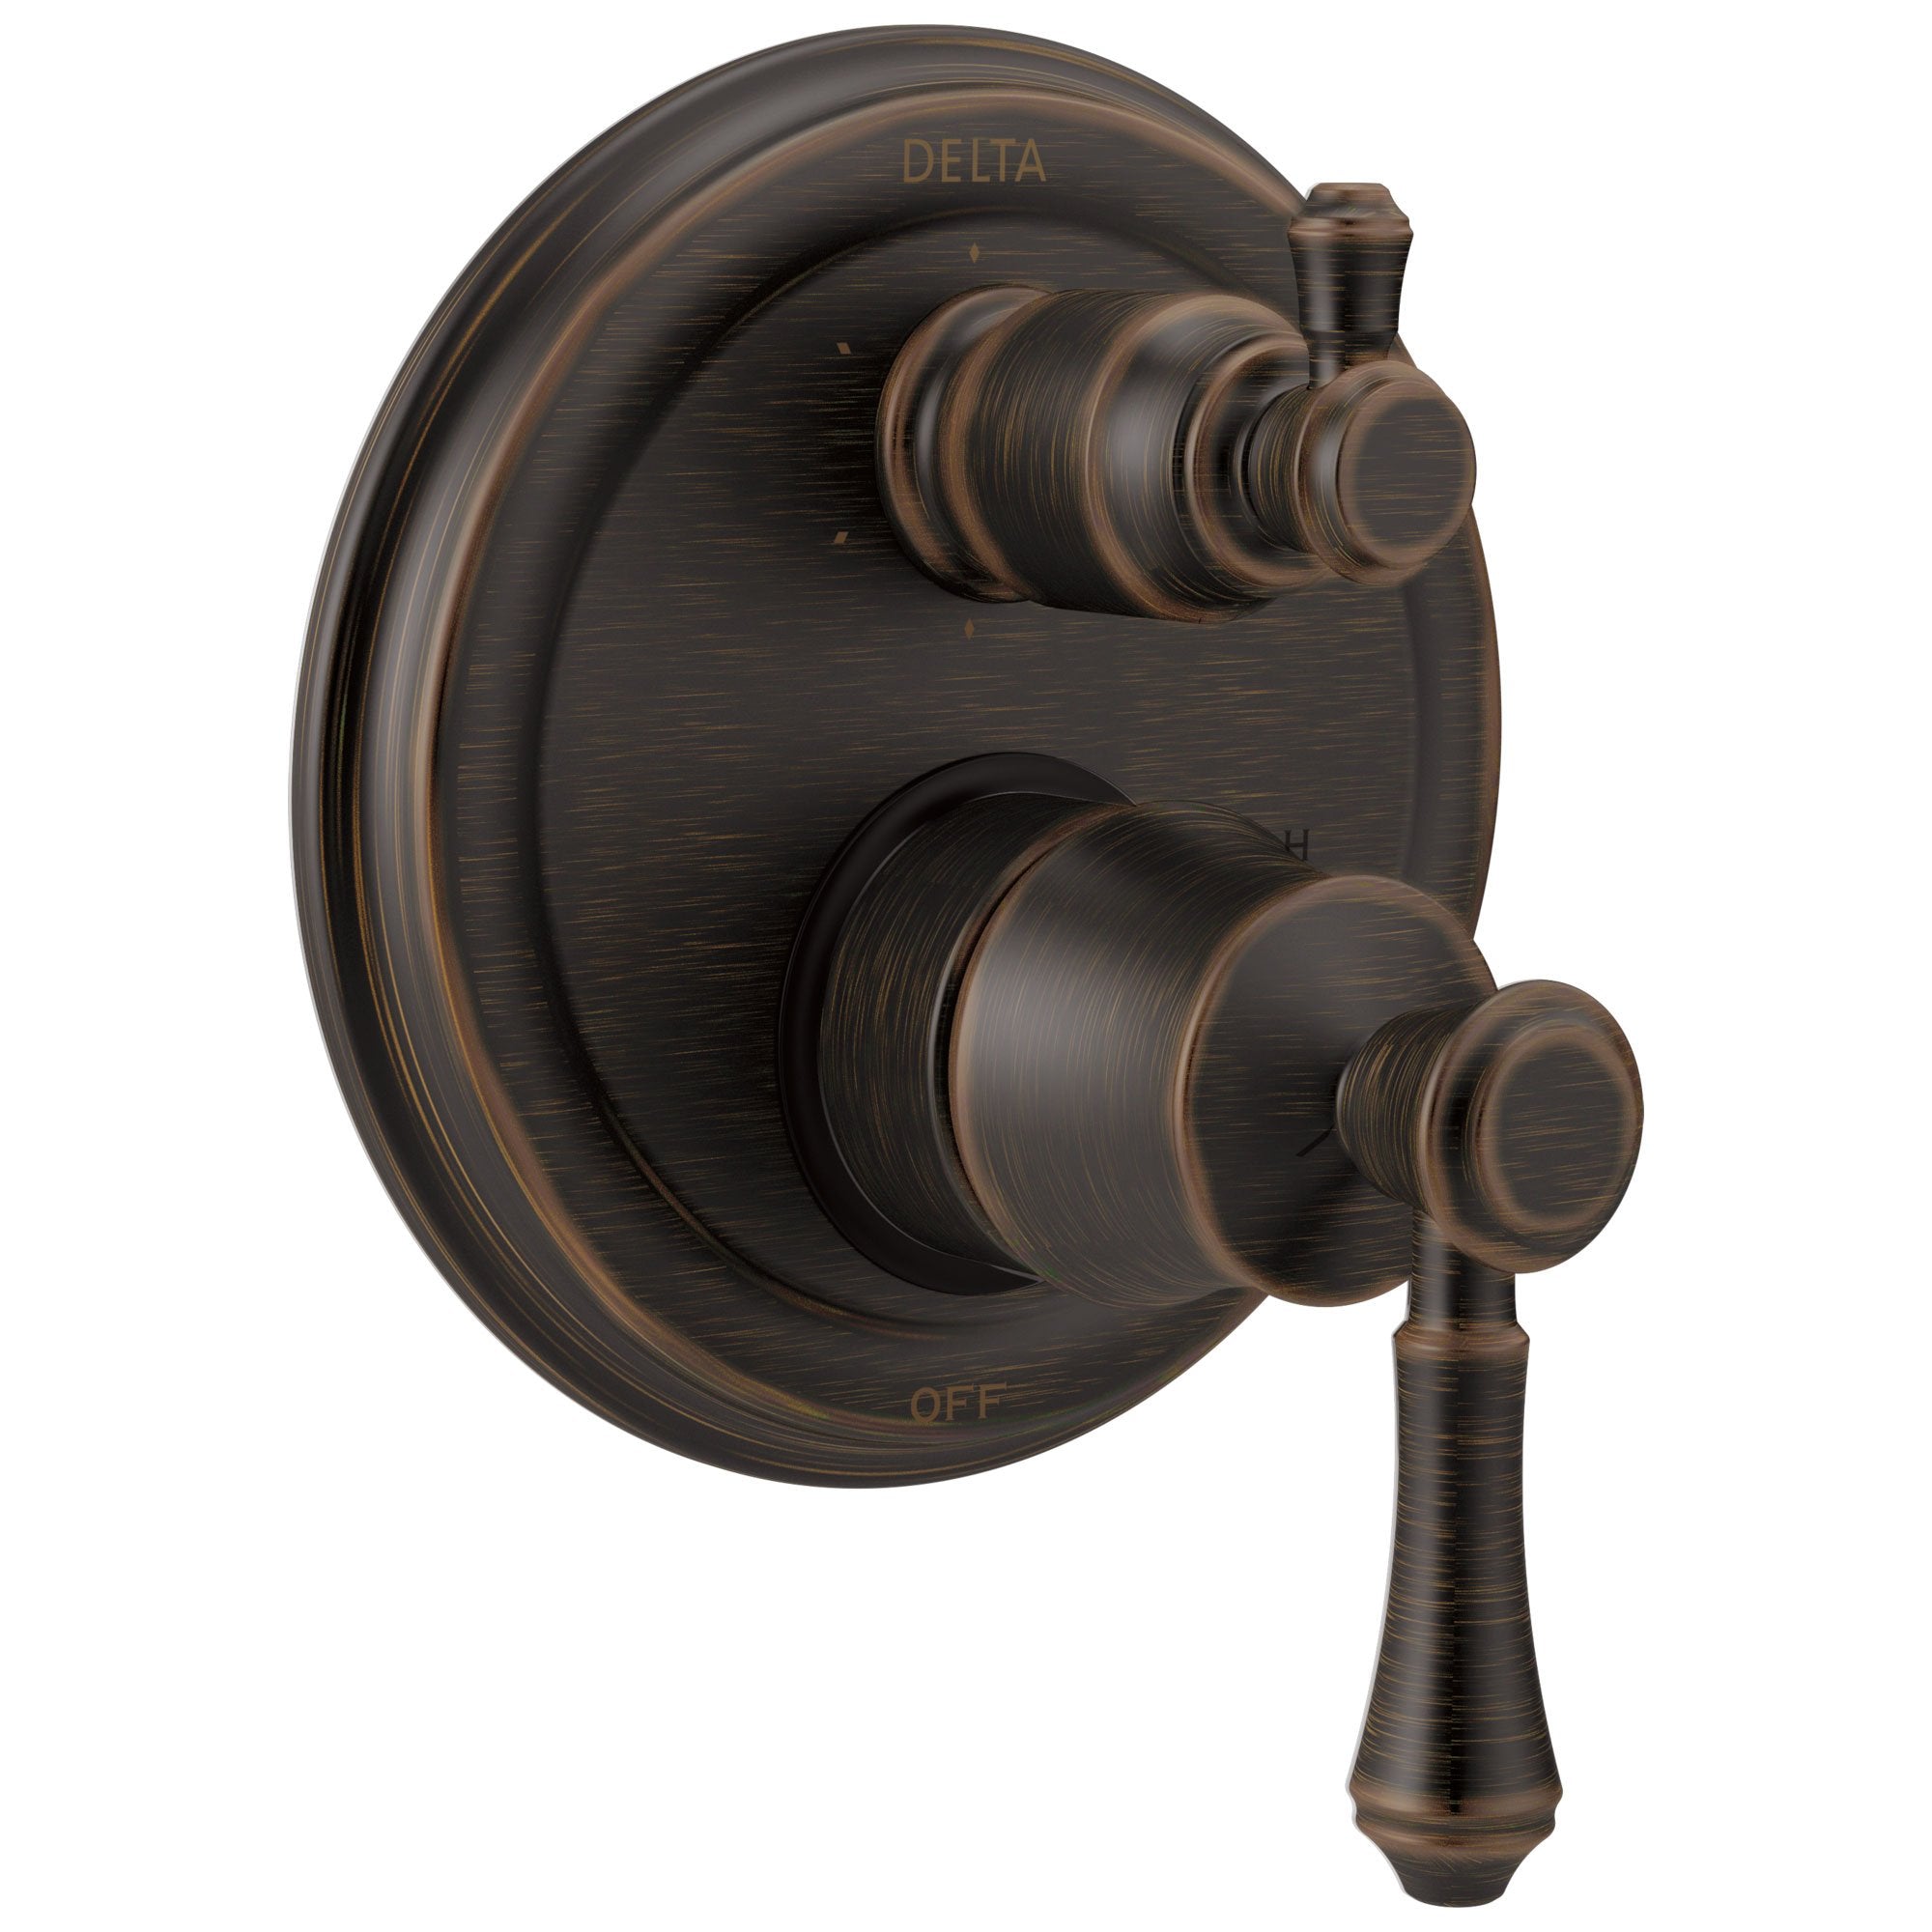 Delta Cassidy Venetian Bronze Traditional Shower Faucet Control Handle with 6-Setting Integrated Diverter Includes Trim Kit and Rough-in Valve with Stops D2187V